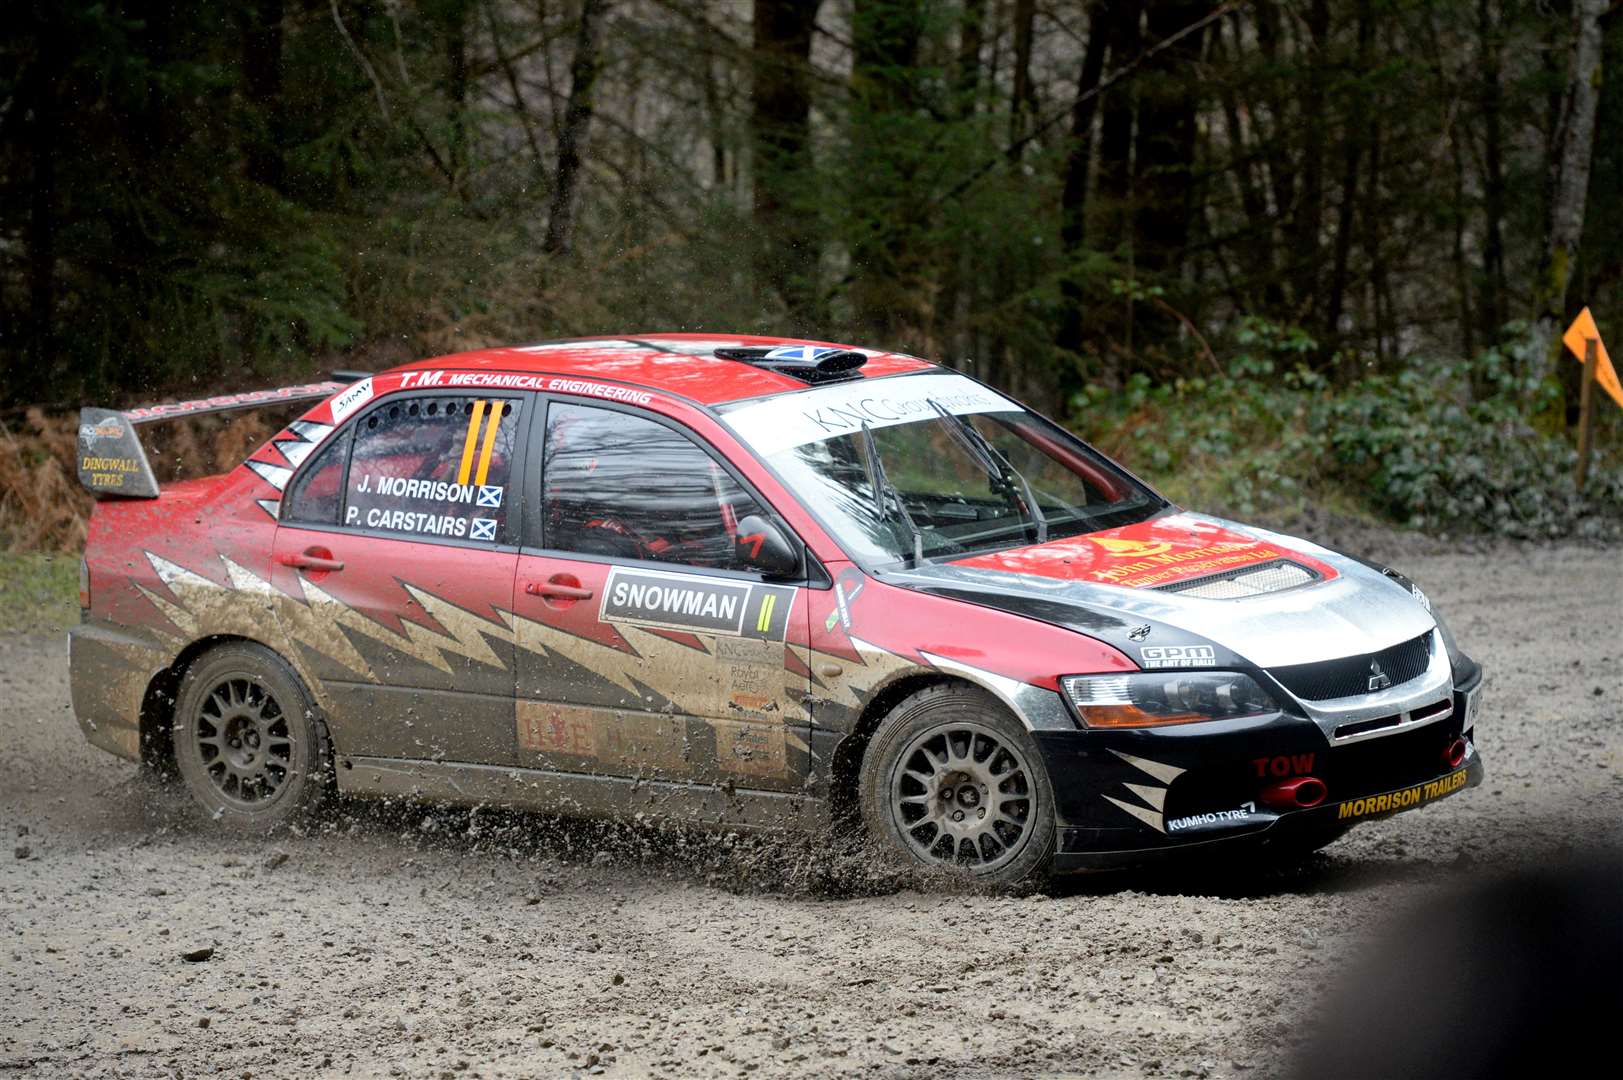 John Morrison from Conon Bridge and Peter Carstairs from St Andrews in their Mitsubishi Evo 9 at the Snowman Rally 2020. Picture: James MacKenzie.